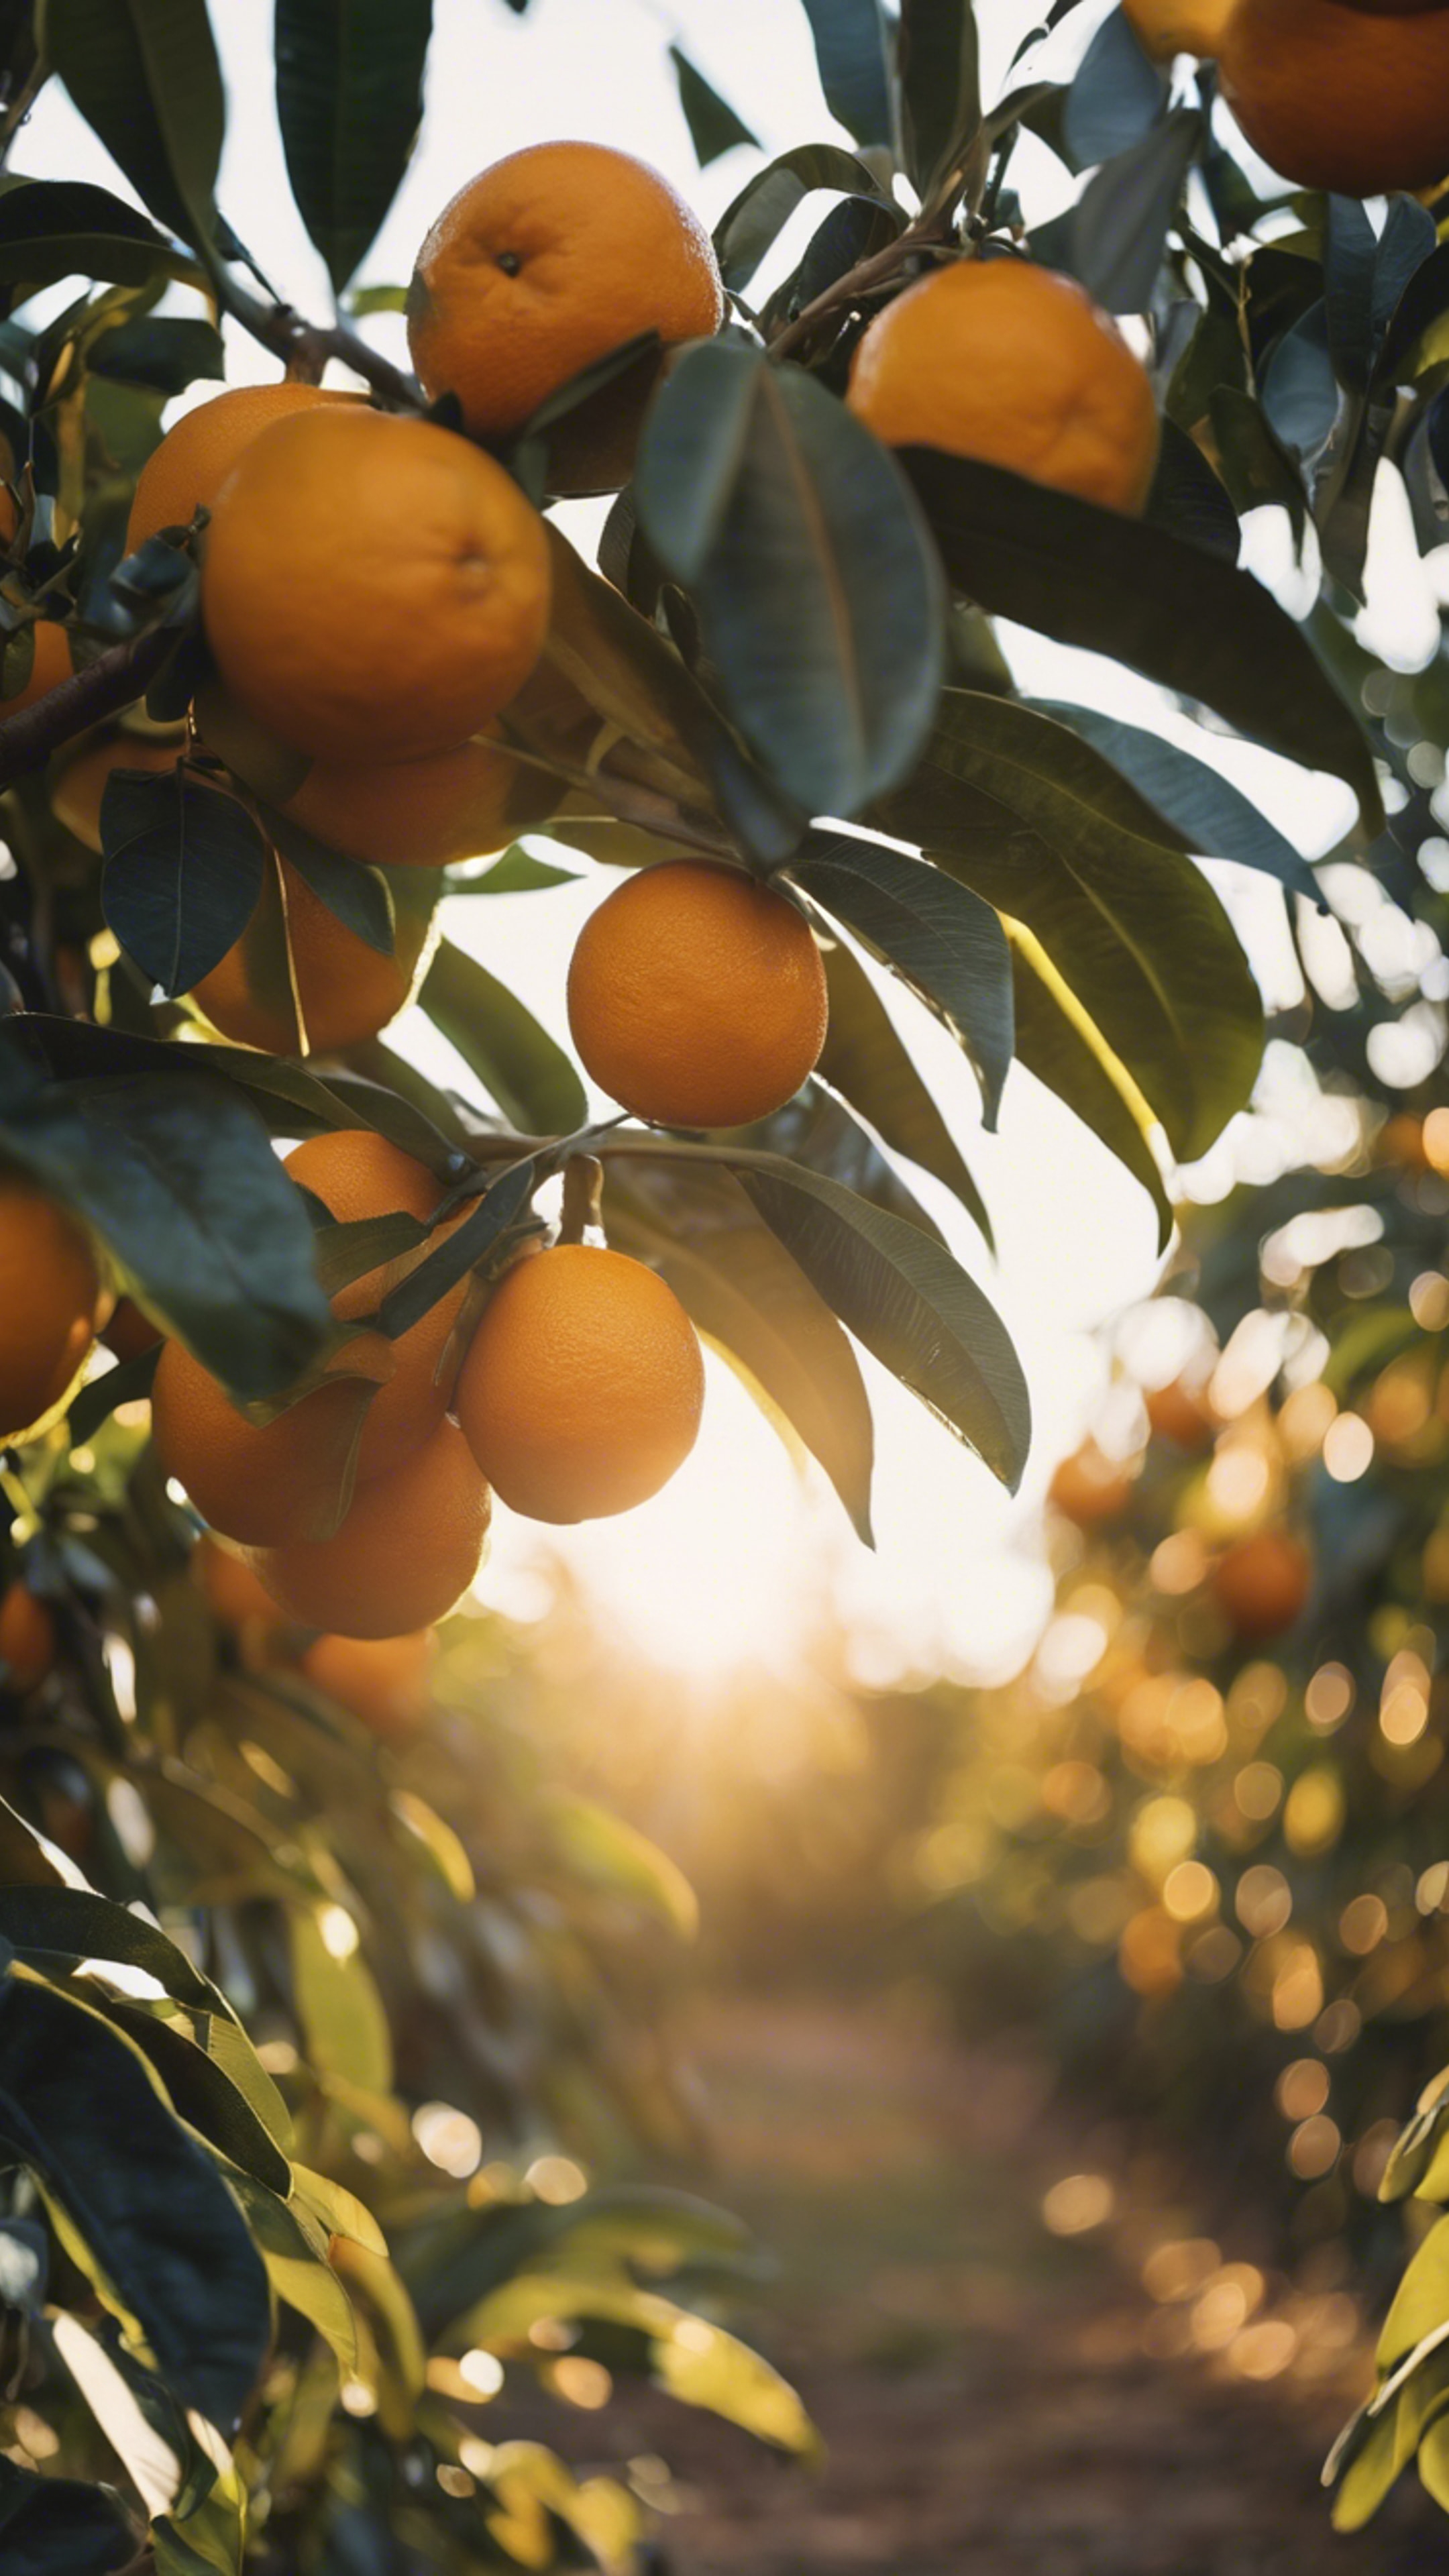 An orange grove in central Florida, with the sun casting a golden hue over ripe oranges ready for harvest.壁紙[4bbebc31cb8441e2b681]